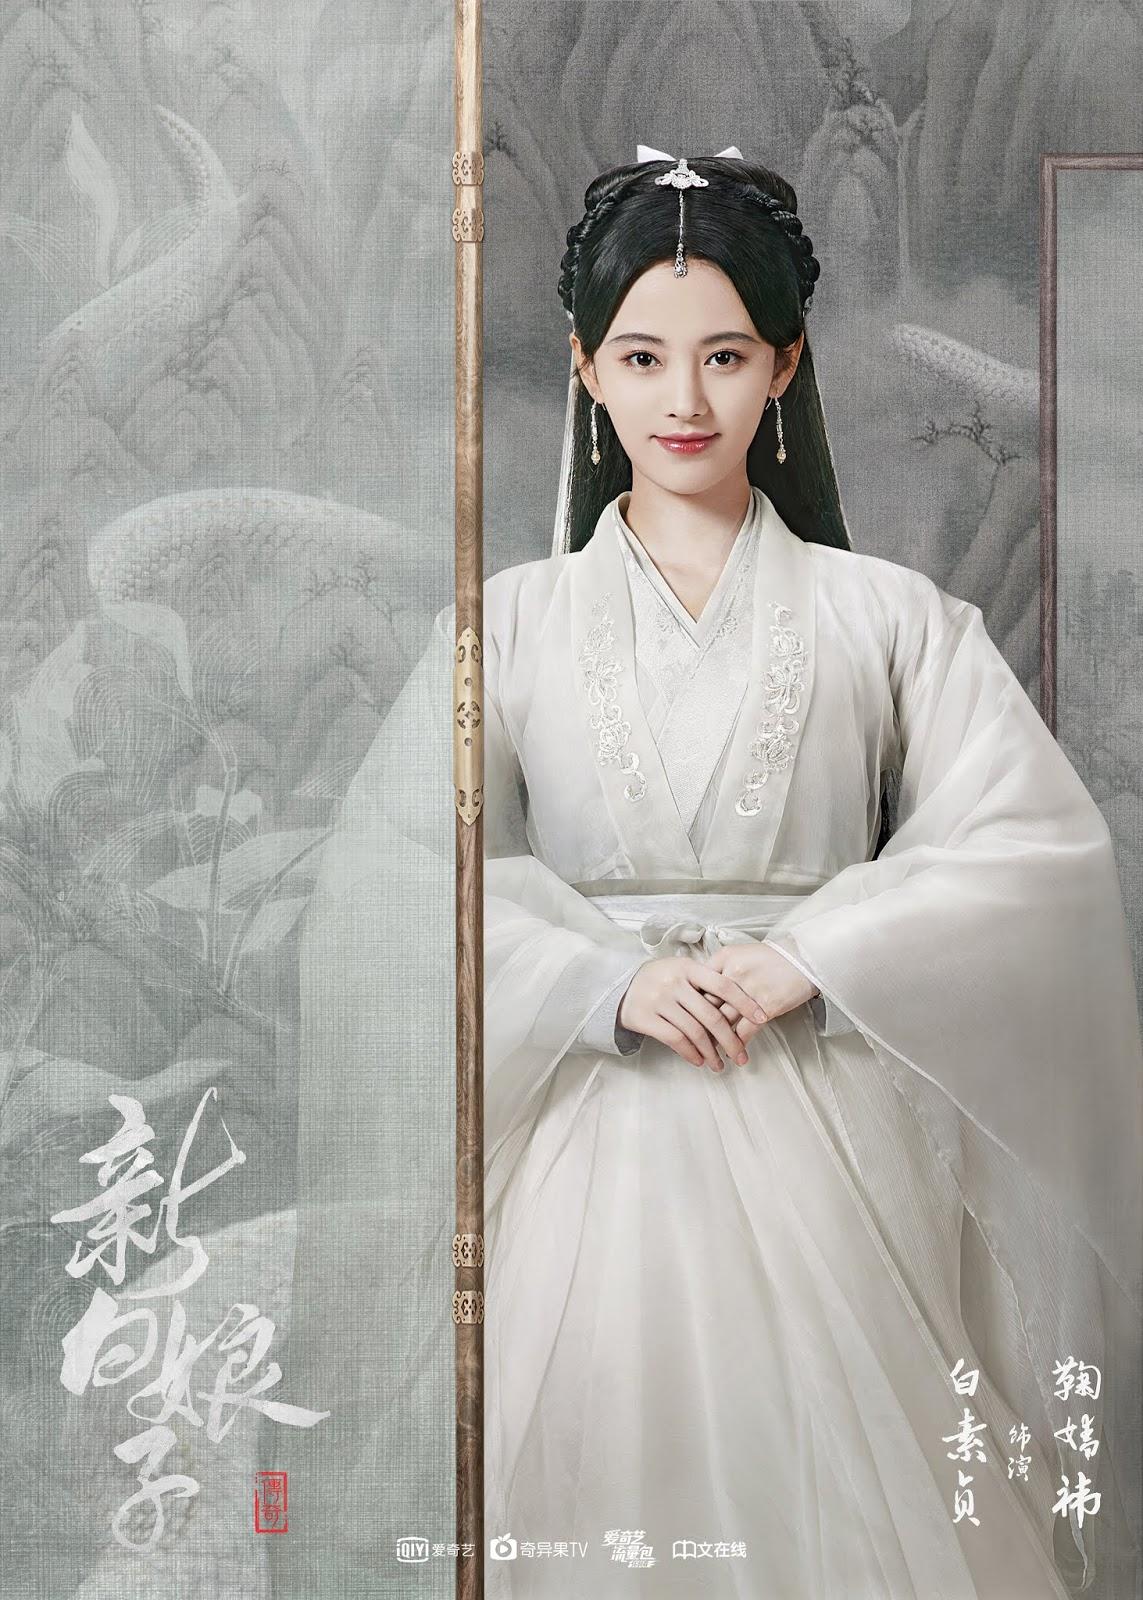 First Posters of Legend of White Snake Starring Alan Yu and Ju